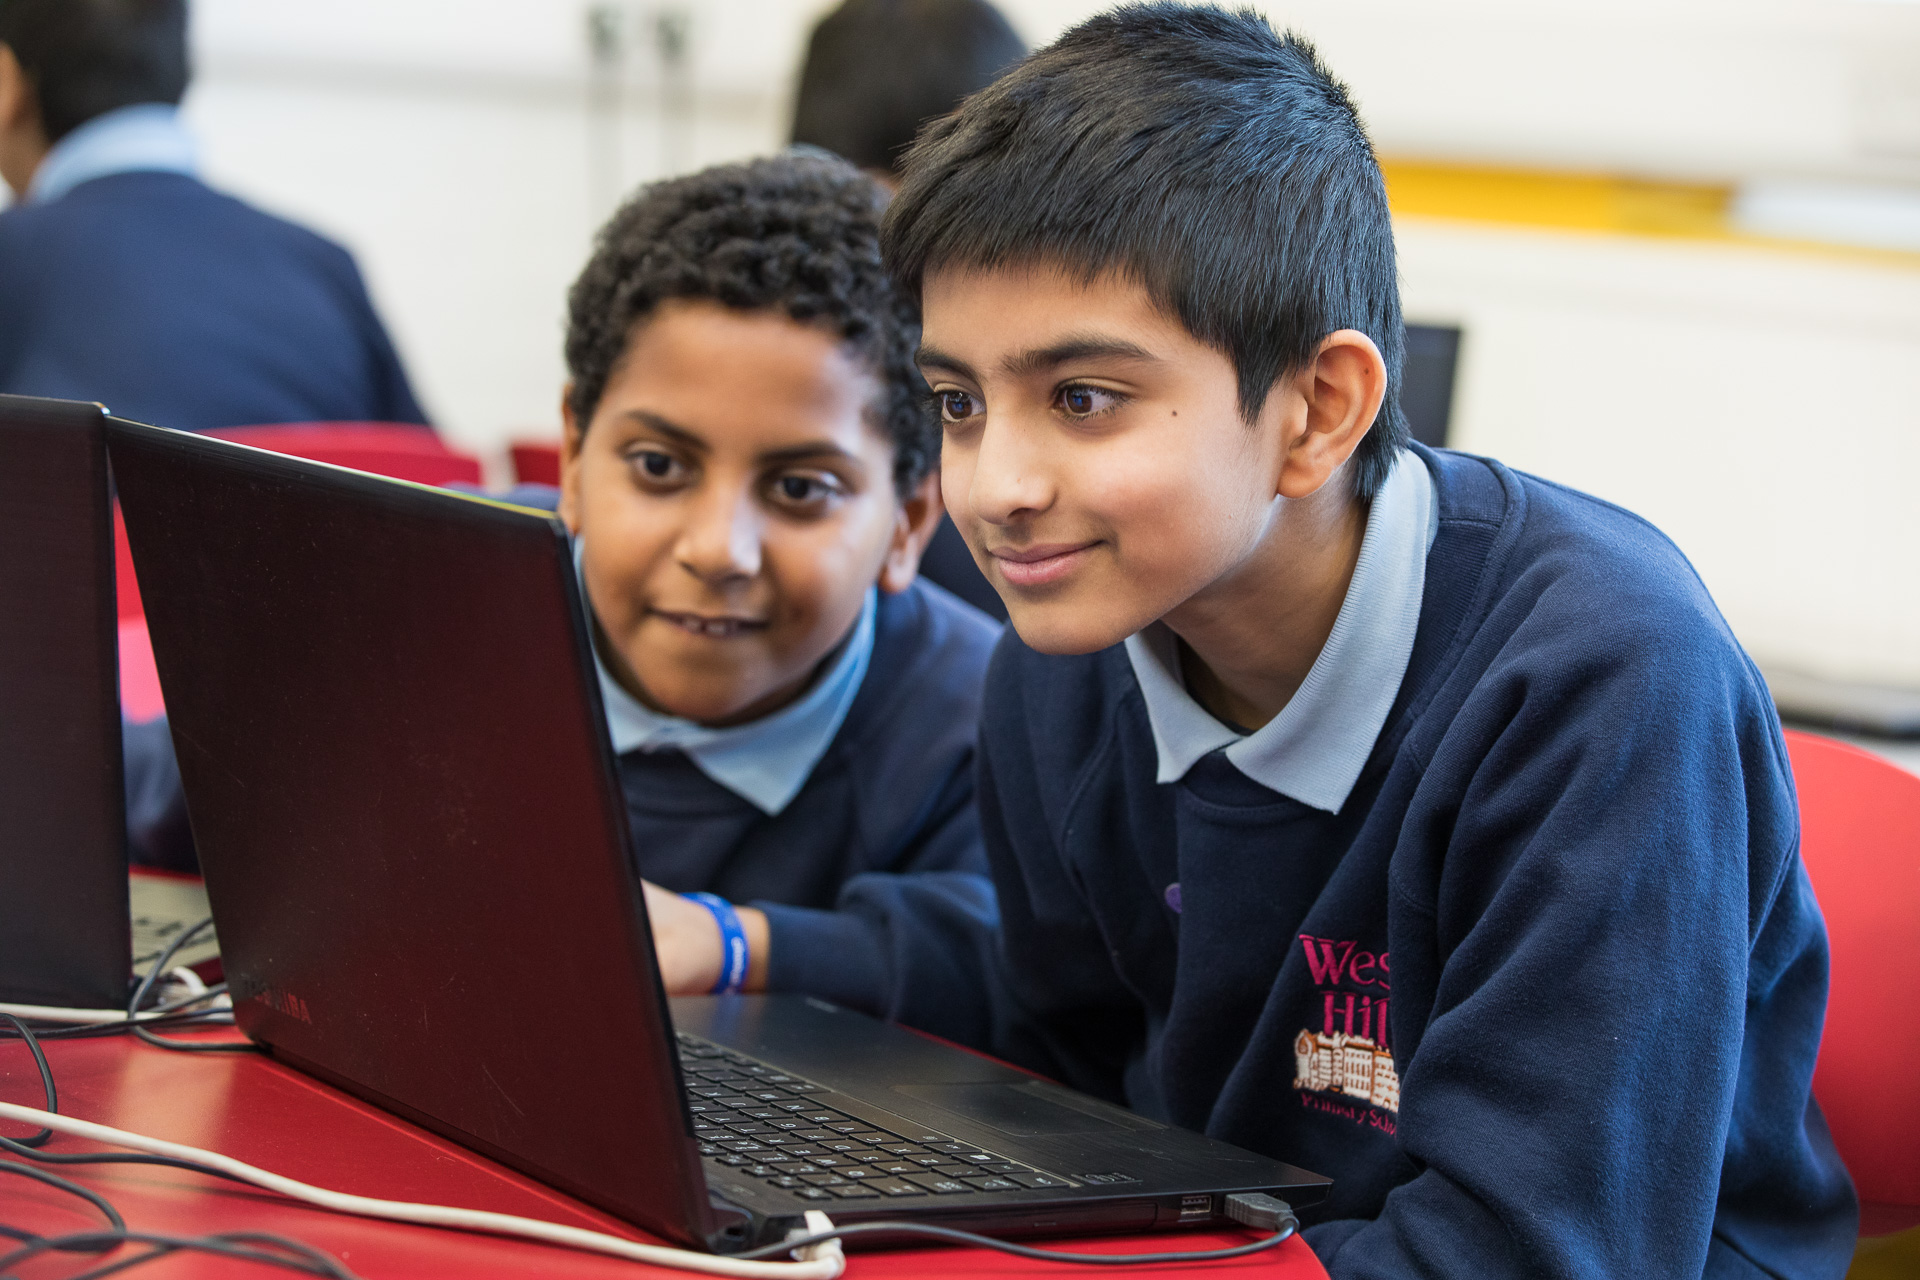 Image of Jaspal and Levi sitting in front of a laptop and working together on a project.